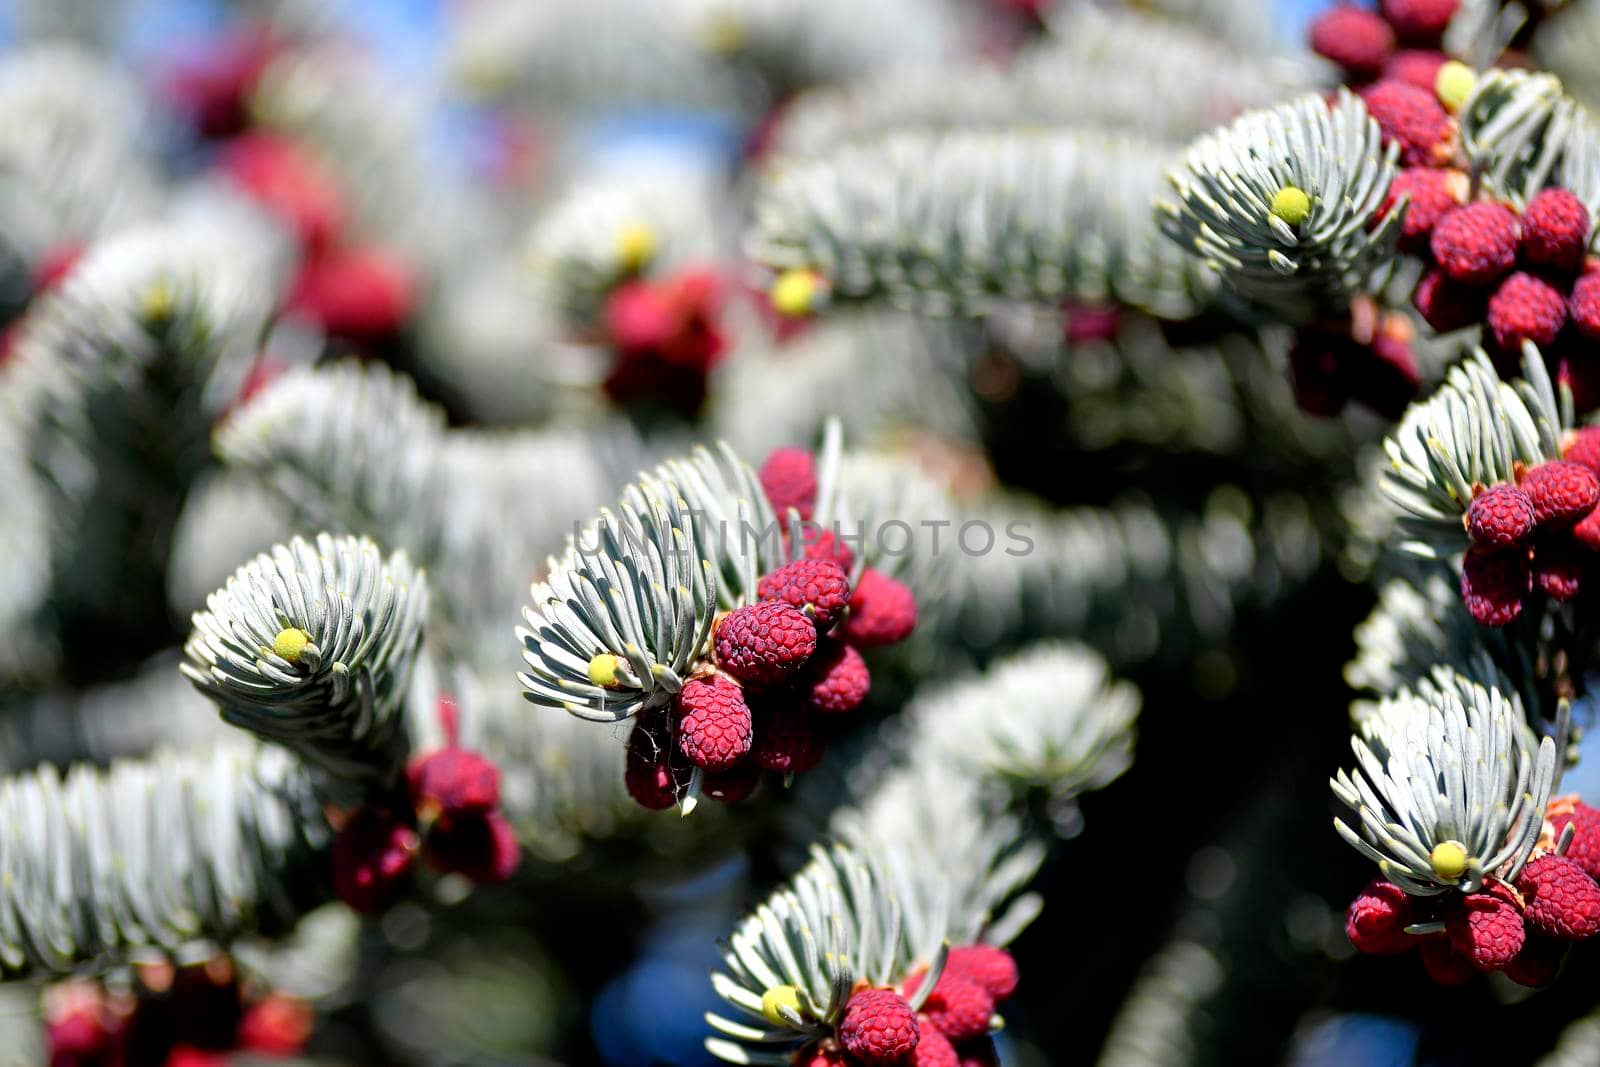 spruce with flower buds and young growing spruce cone by Jochen